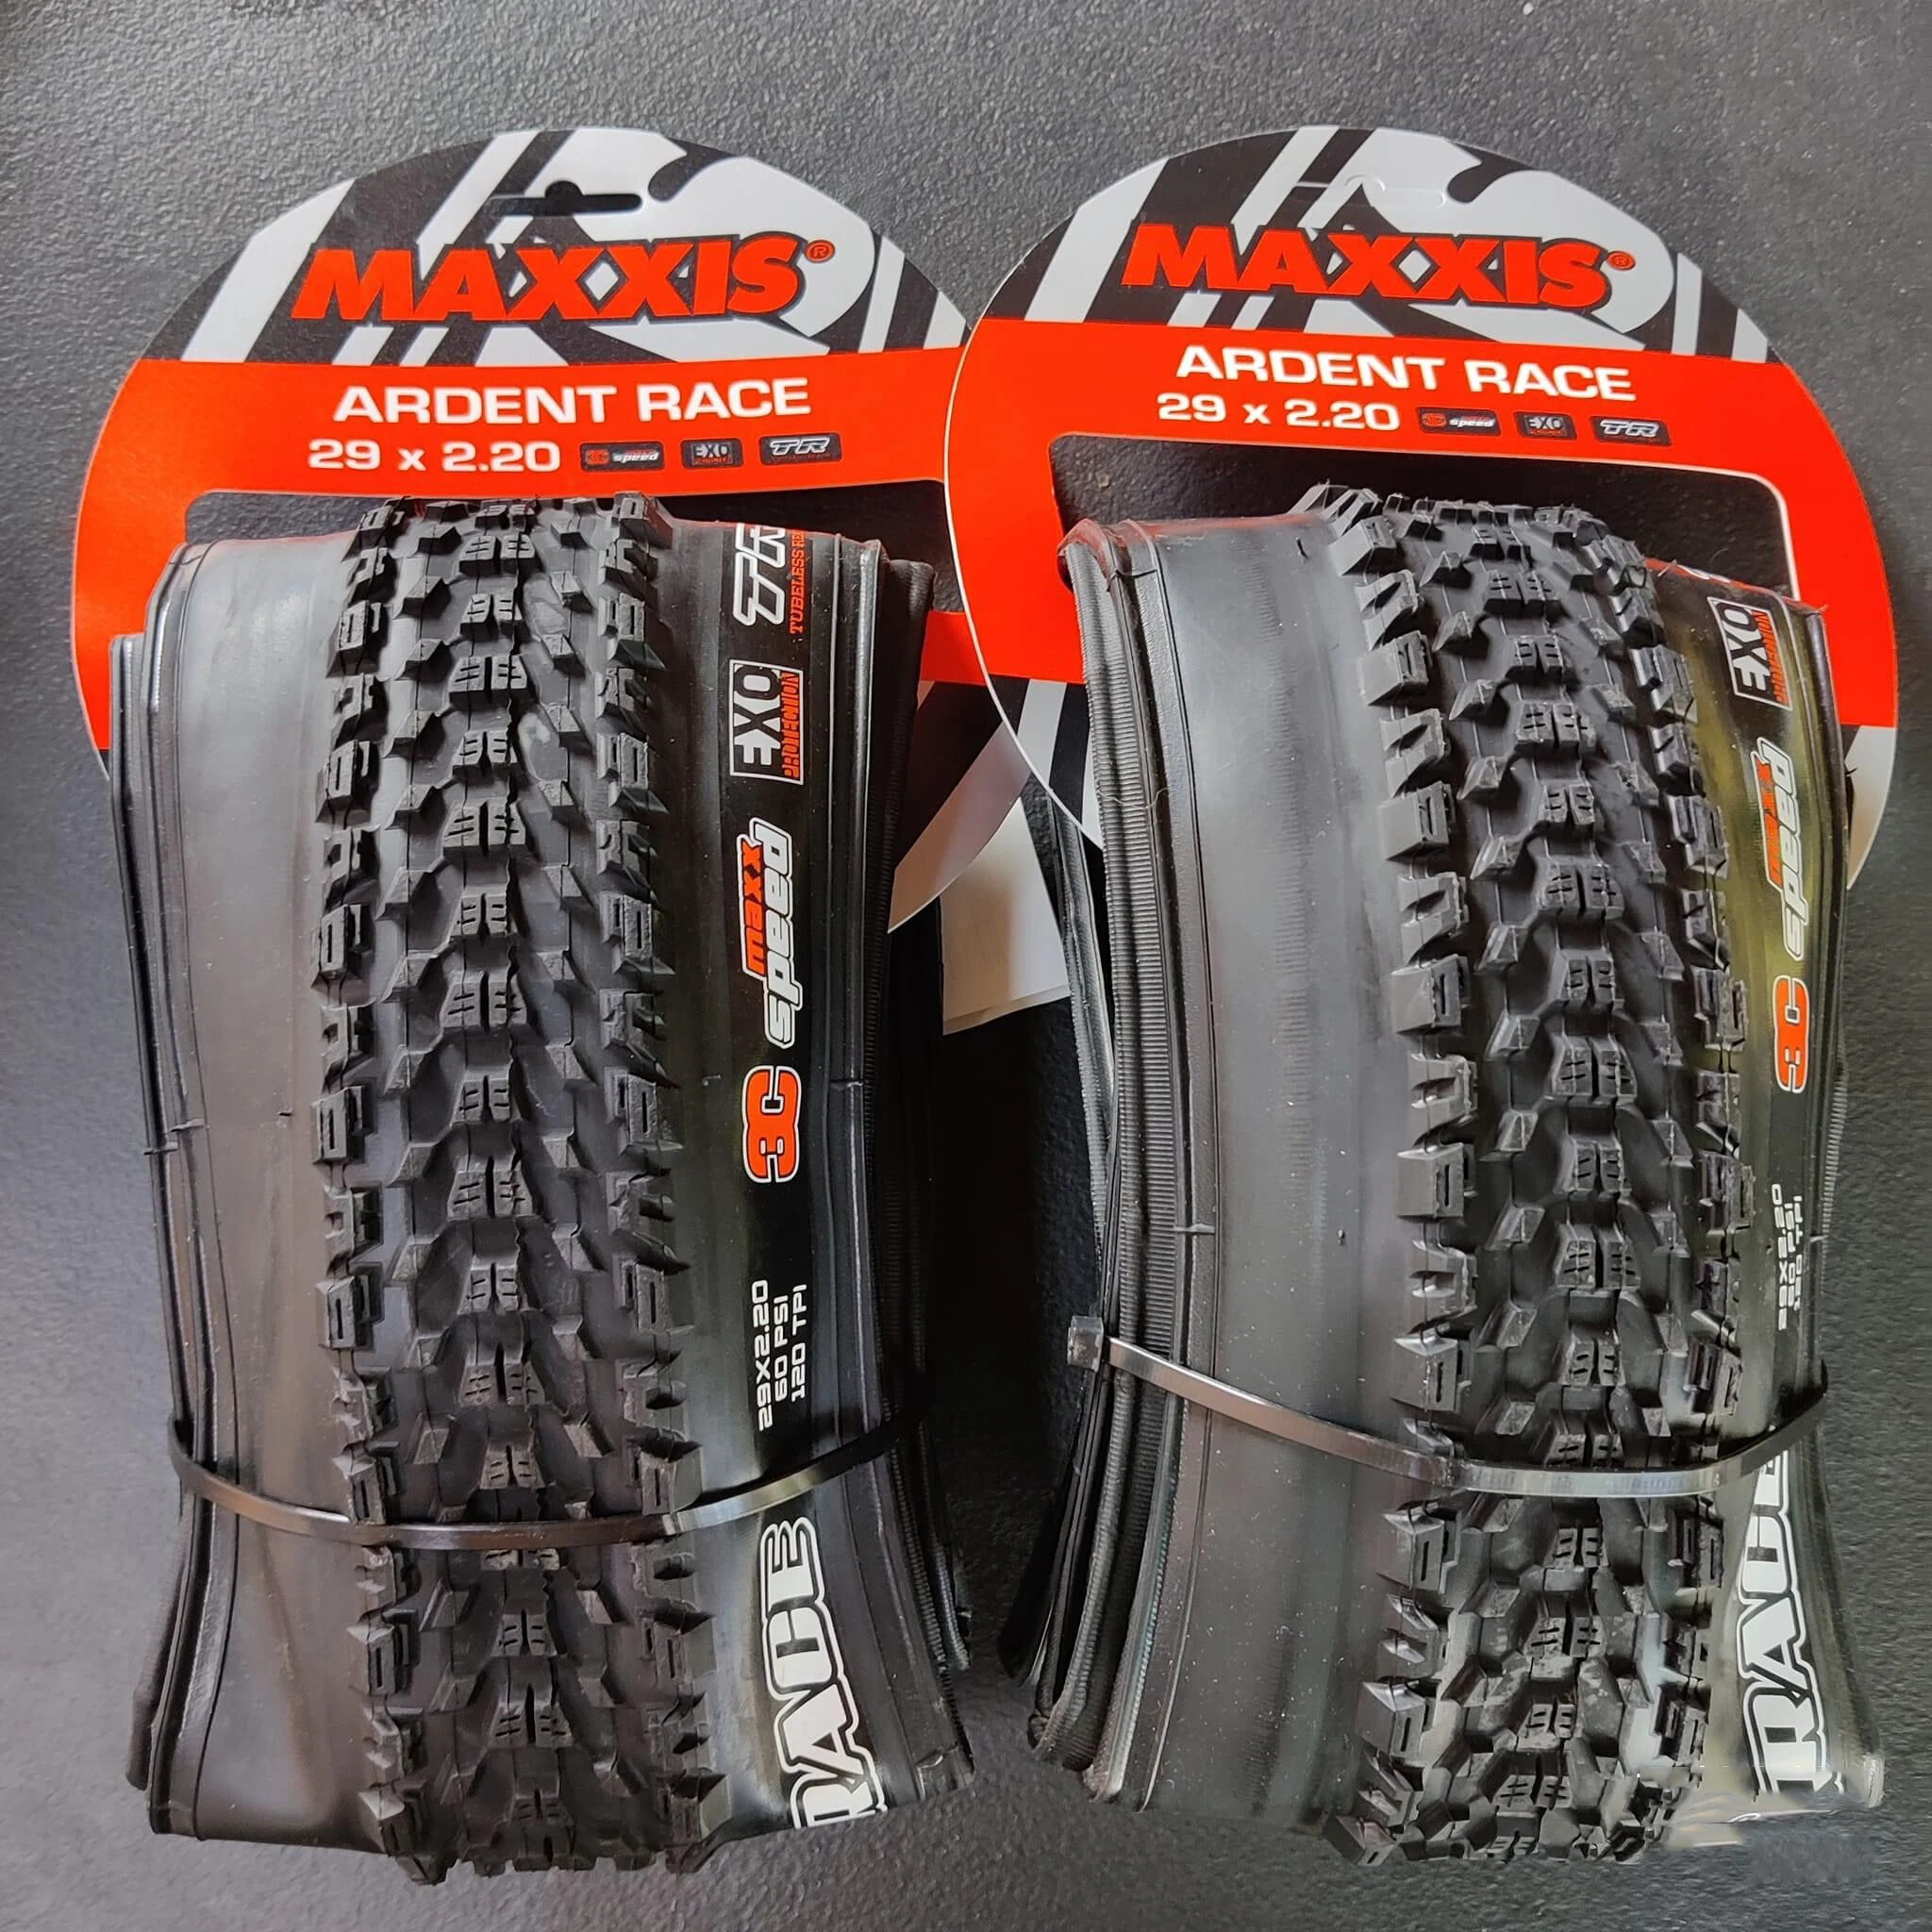 MAXXIS ARDENT RACE (M329ru) Bike Tire Without Resistance Chamber